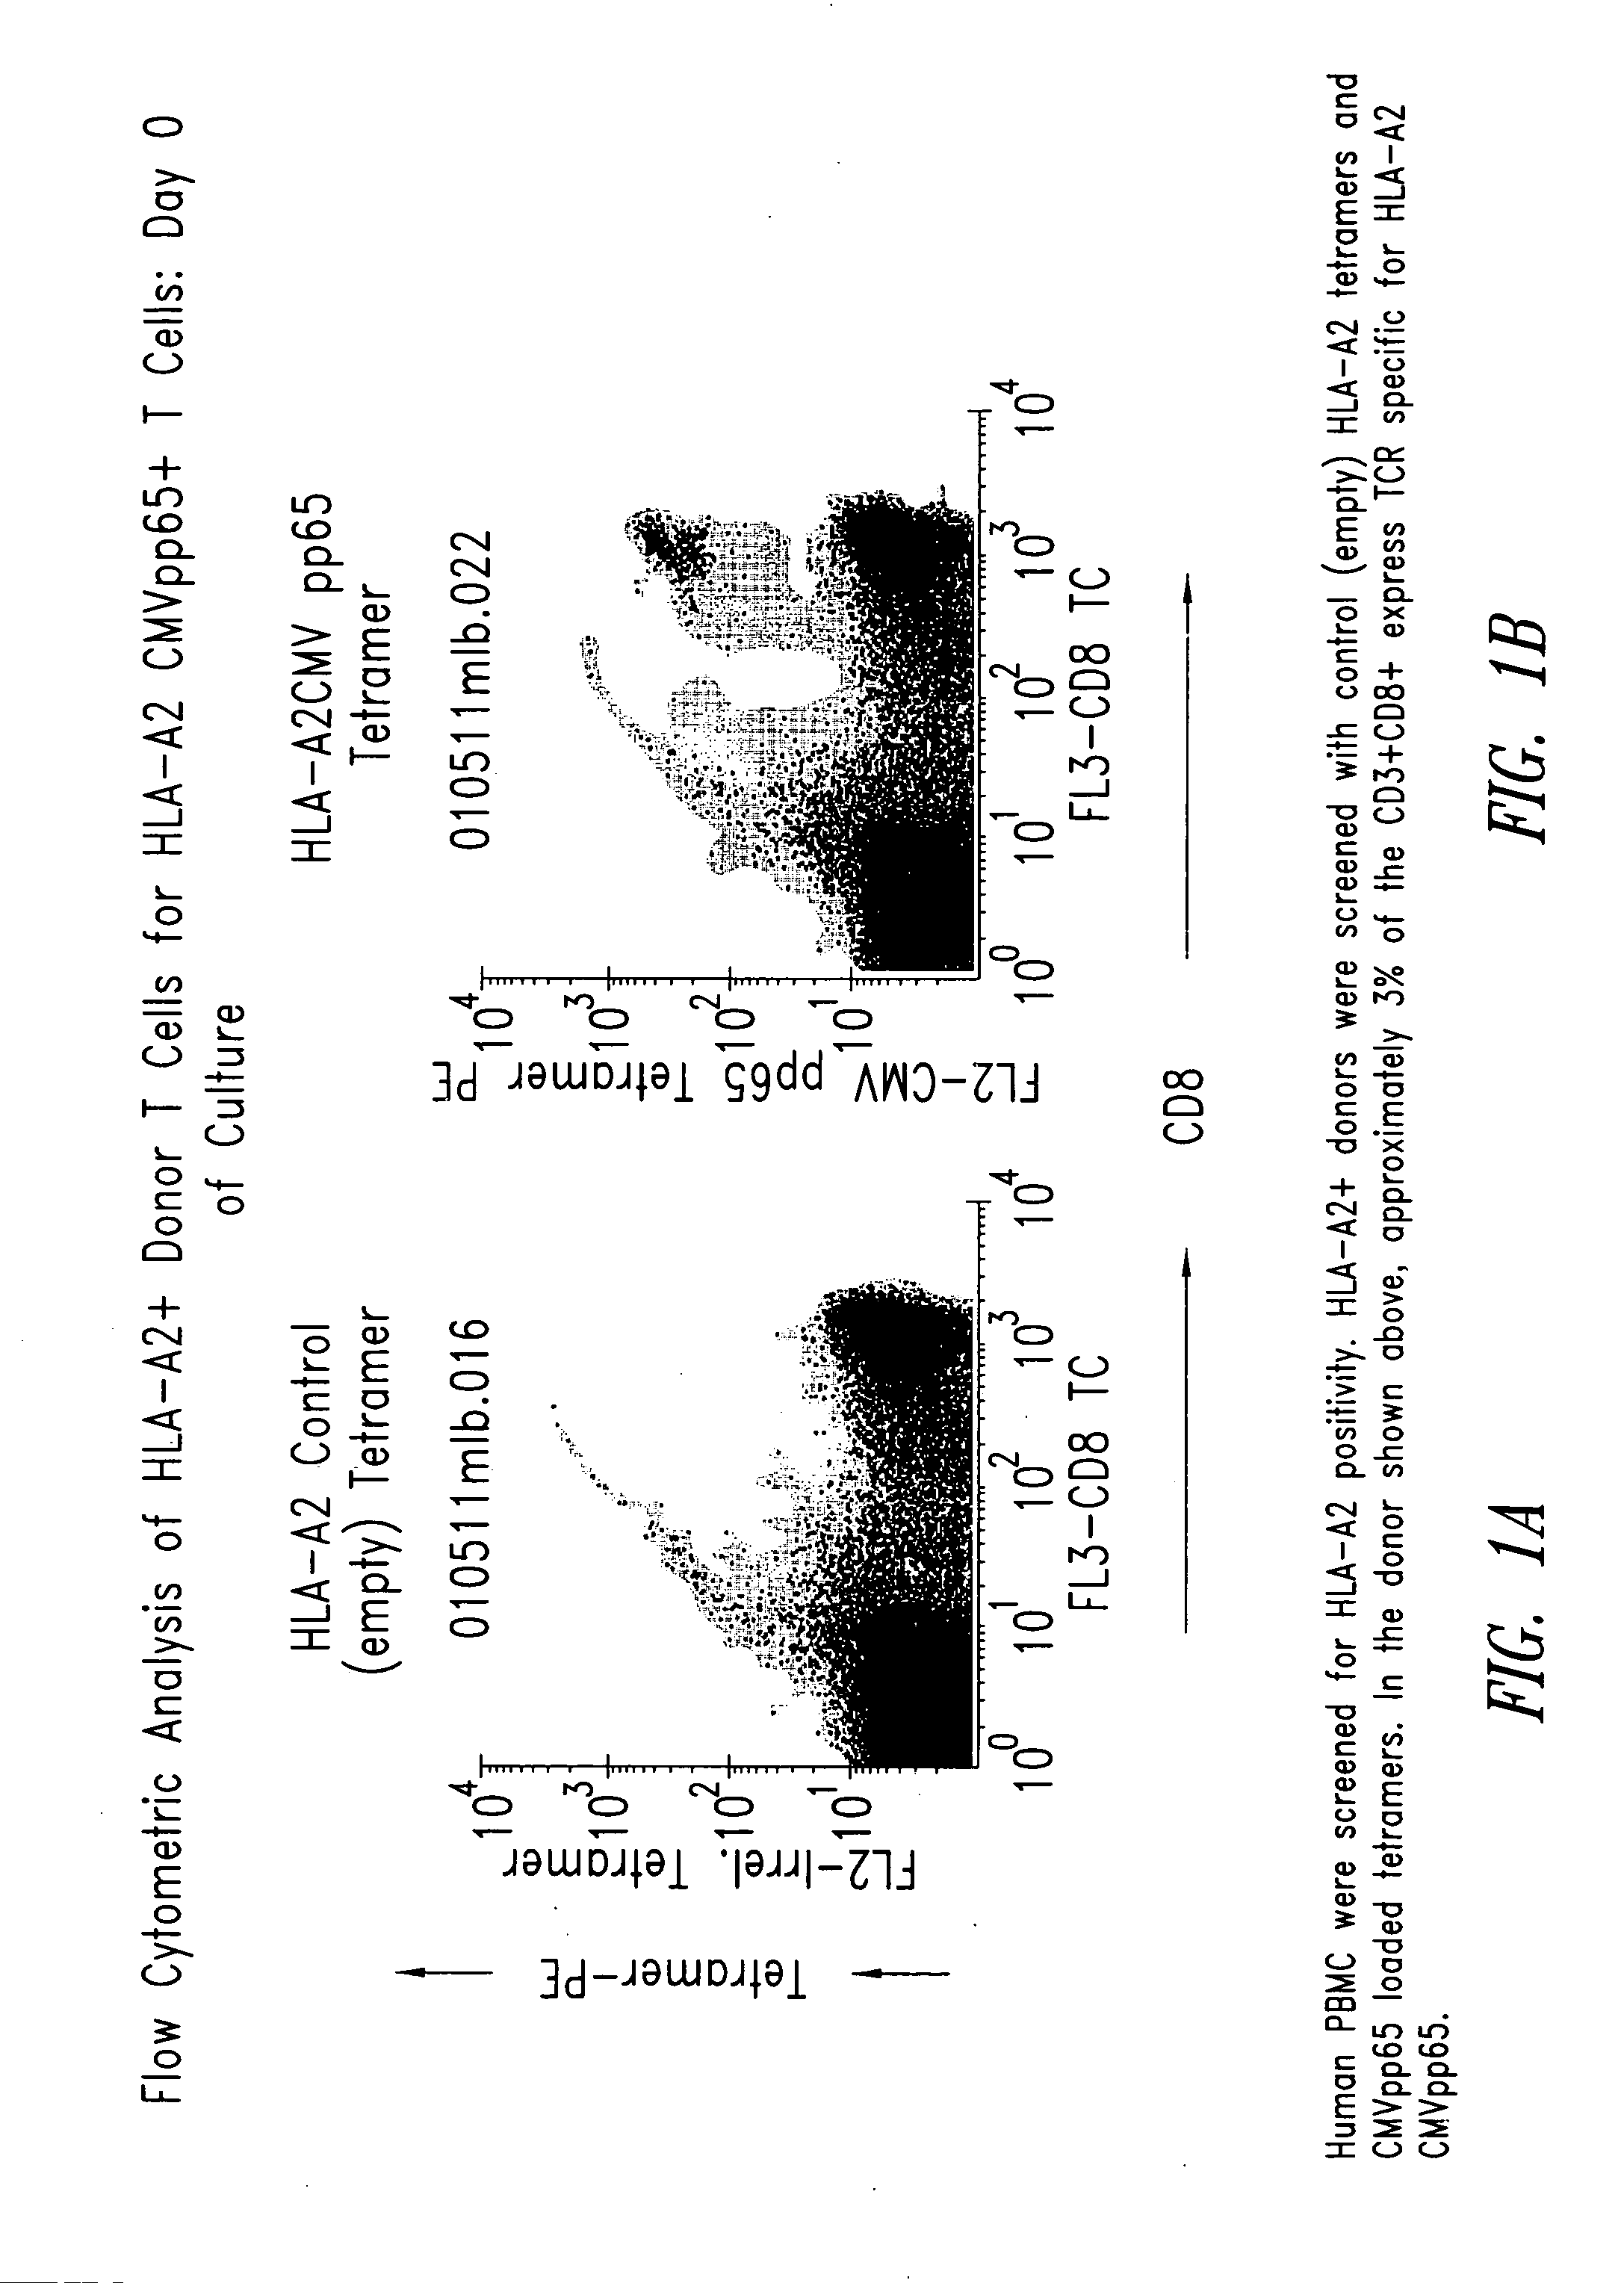 Compositions and methods for eliminating undesired subpopulations of T cells in patients with immunological defects related to autoimmunity and organ or hematopoietic stem cell transplantation